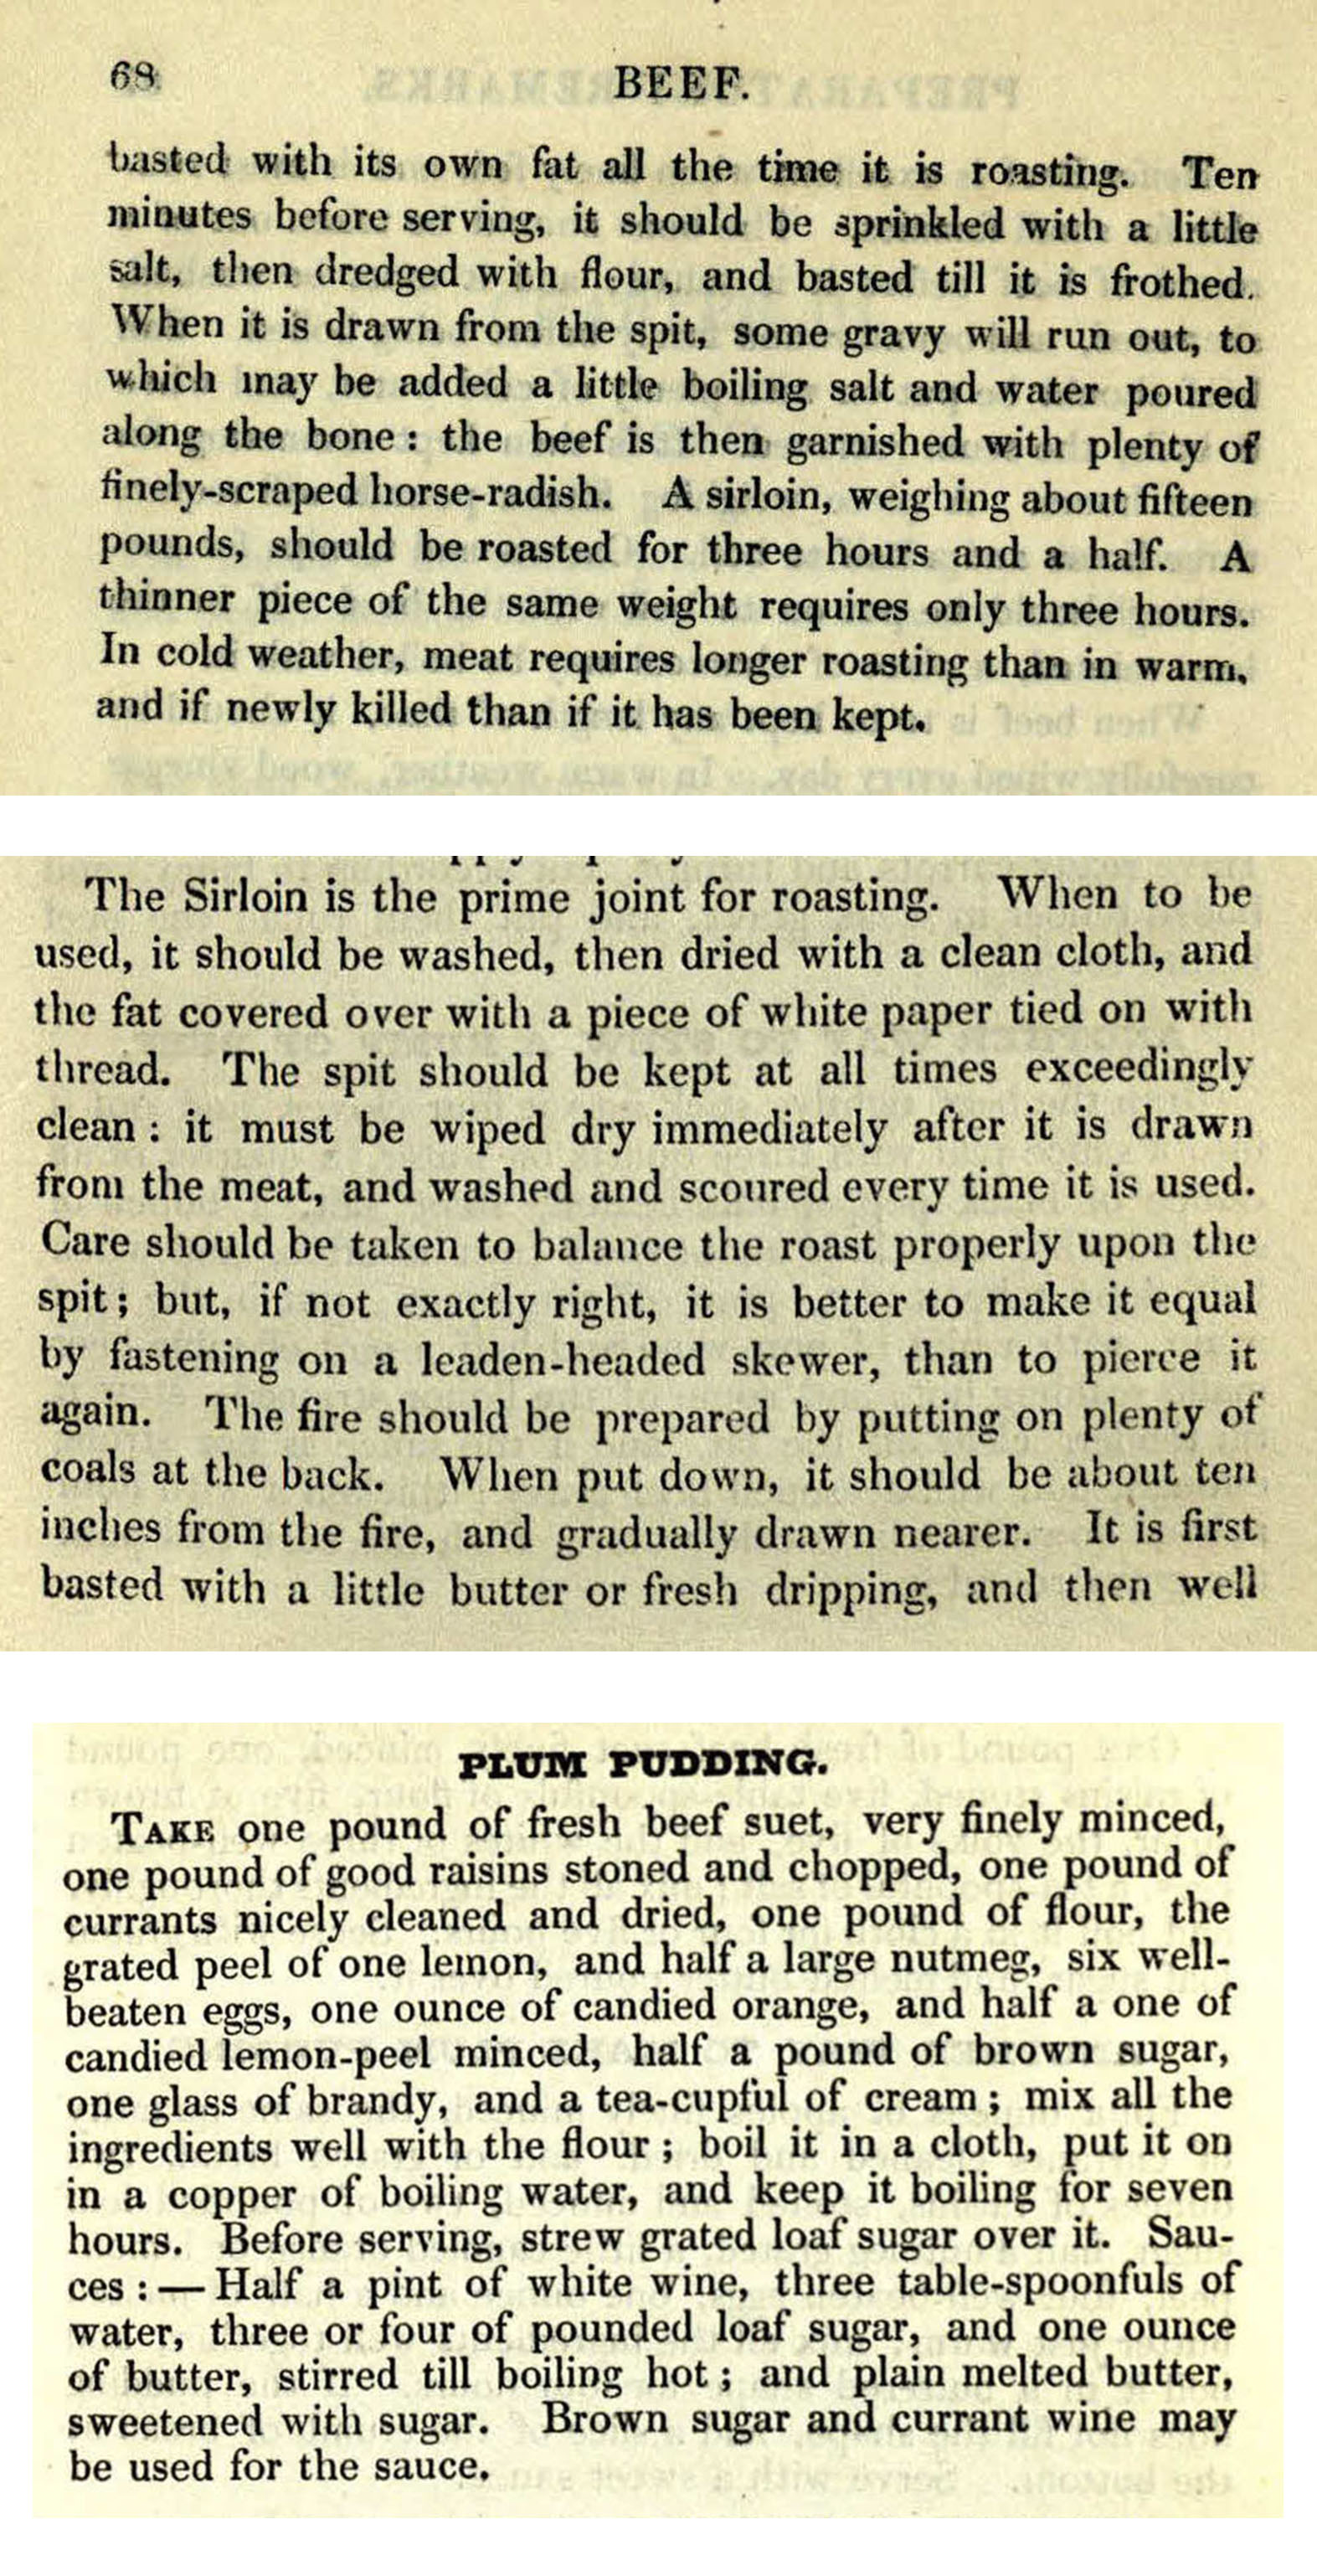 Beef and plum pudding recipes from The practice of cookery: adapted to the business of every-day life, by Mrs Dalgairns. 1860 sTX717.D2 